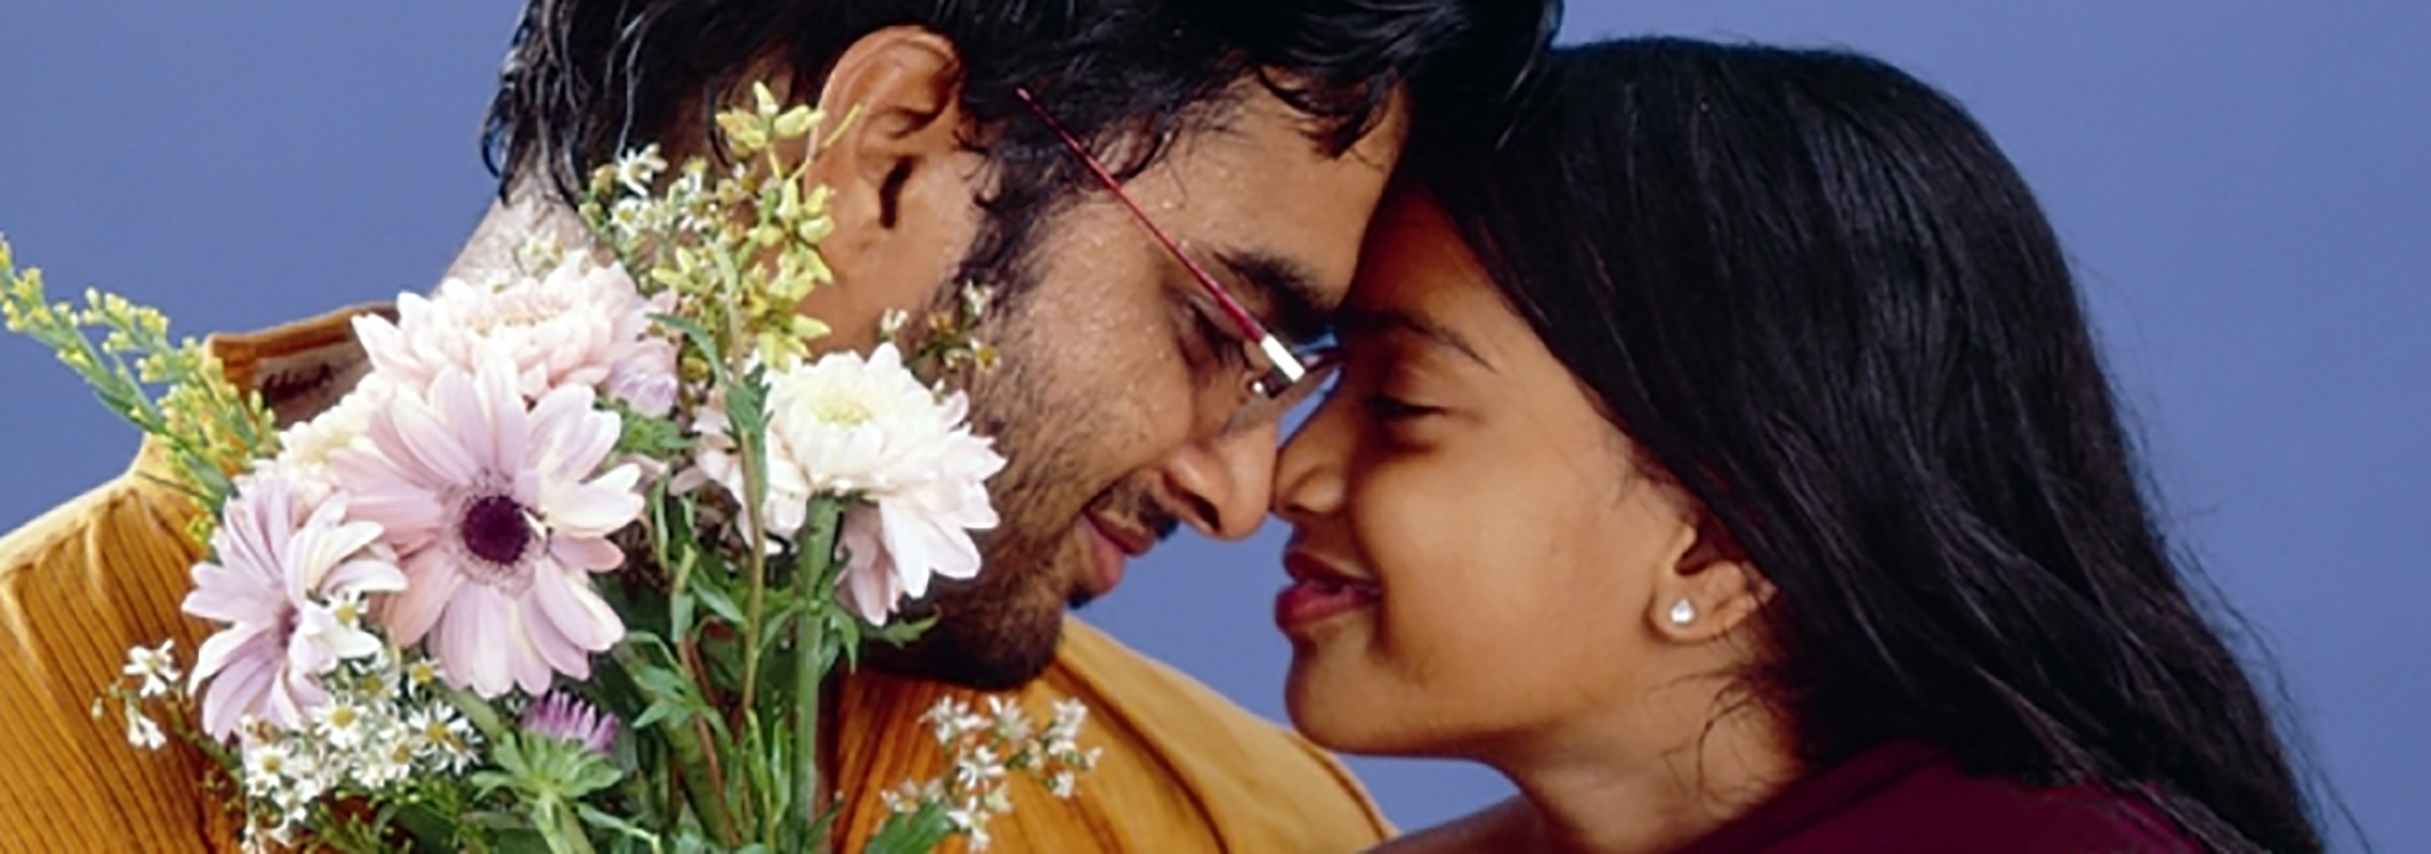 Man holding flowers and leaning his forehead to a smiling woman.